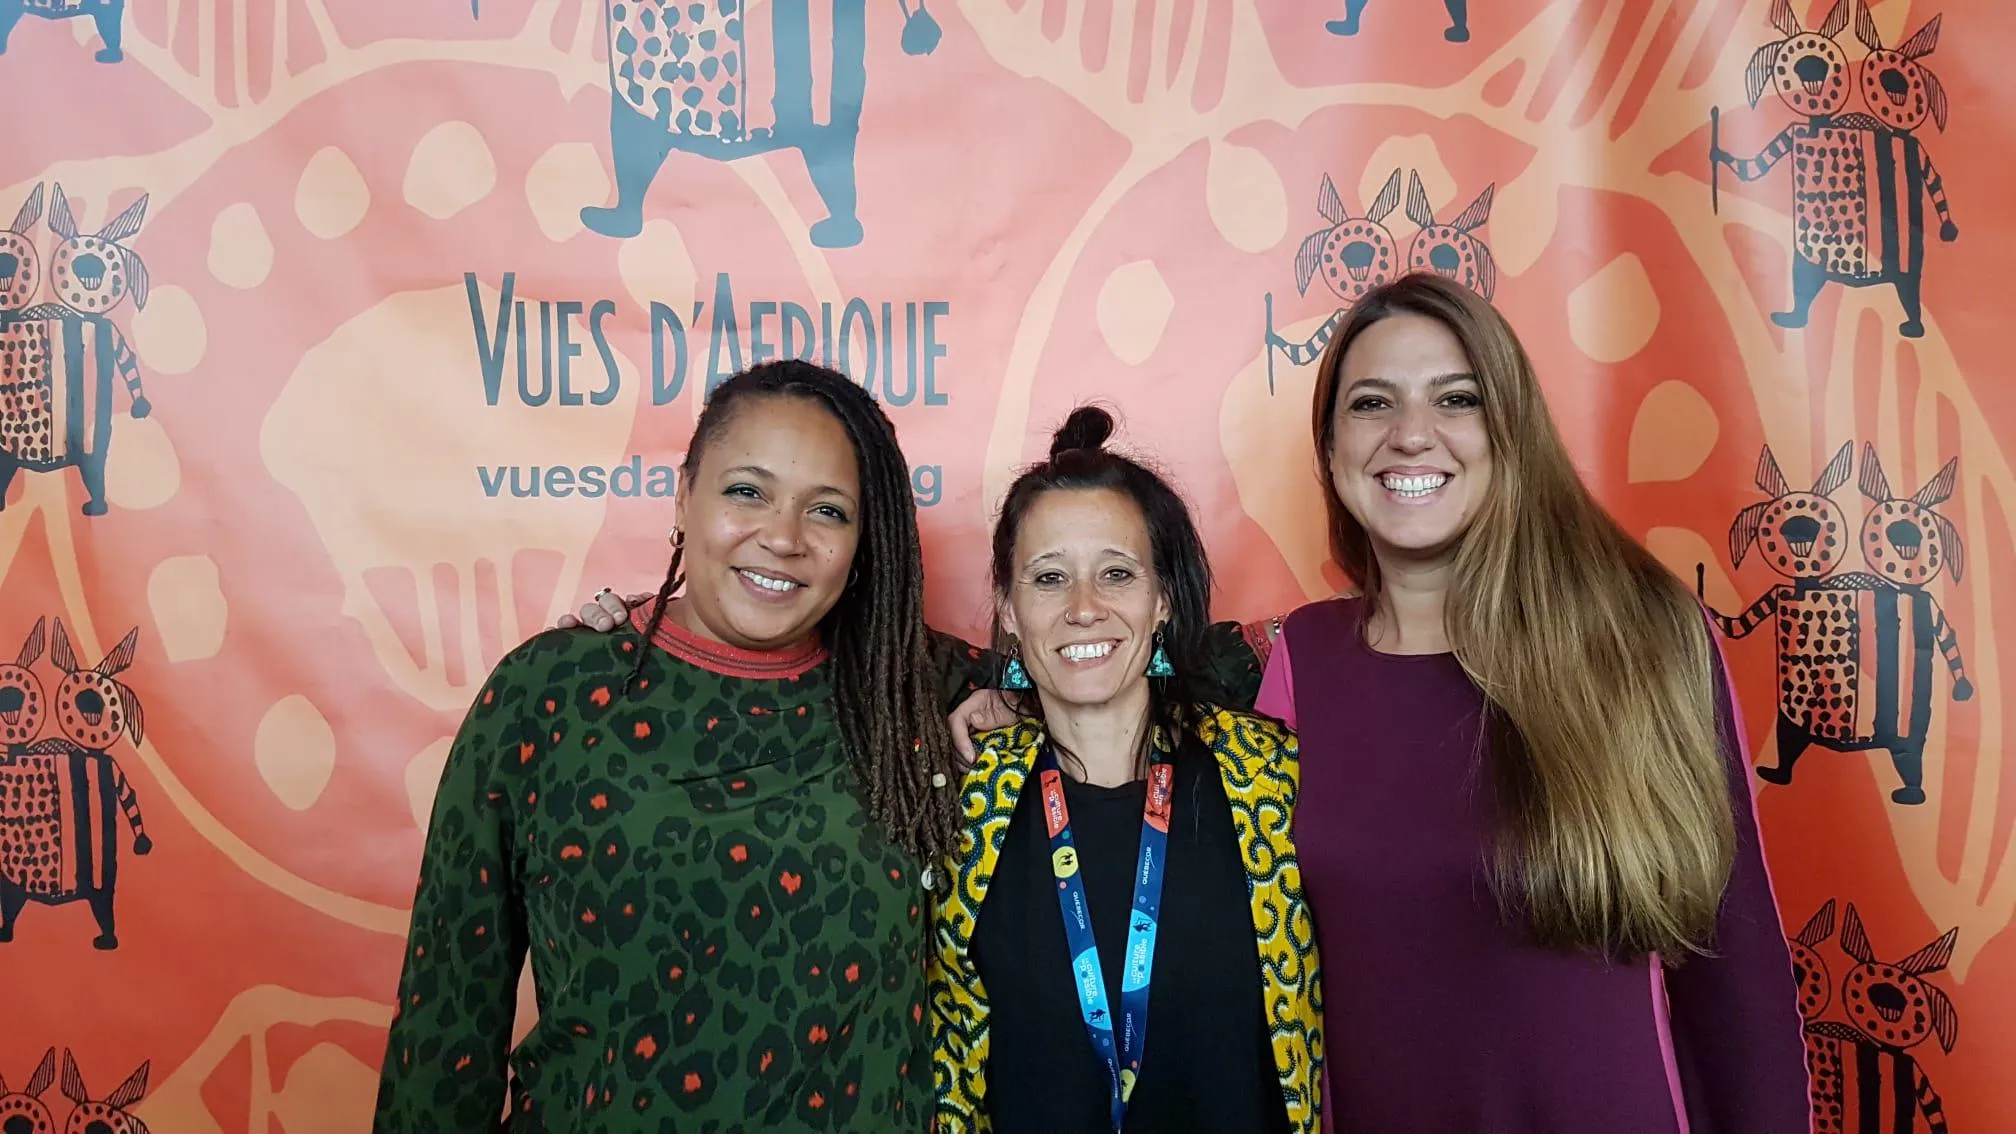 Dr Estrella Sendra (right) with filmmaker Maïmouna Jallow (left) and journalist and research collaborator Laura Feal at the Festival Vues d’Afrique in Montréal, Canada, where she conducted fieldwork and presented a conference paper in April 2023